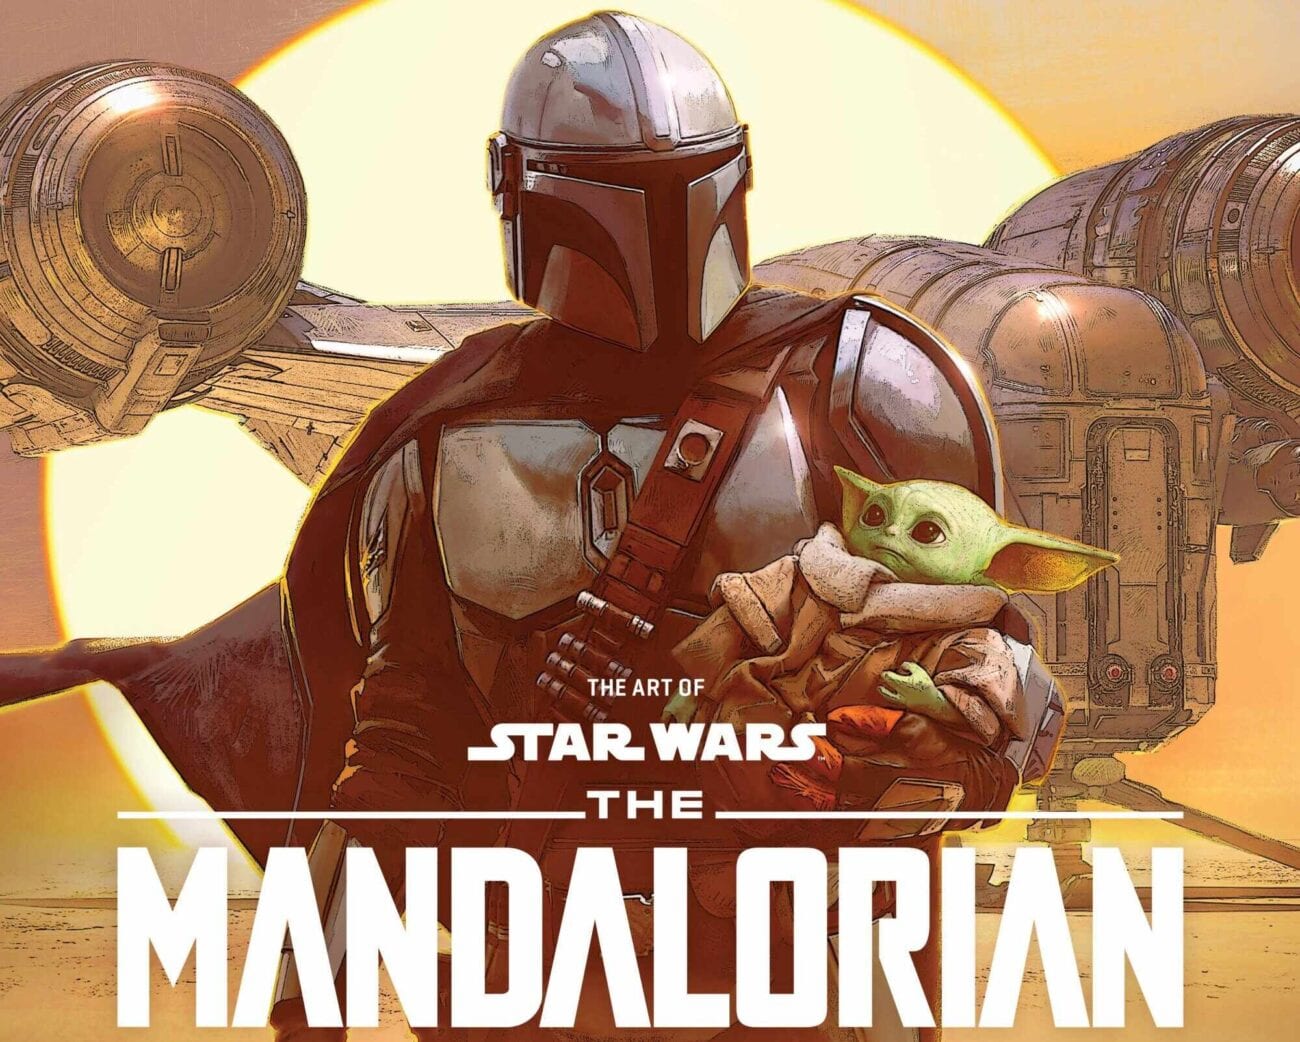 Mark your calendars, because 'The Mandalorian' season 2 premiere is coming. Here’s what you need to know about the timeline.